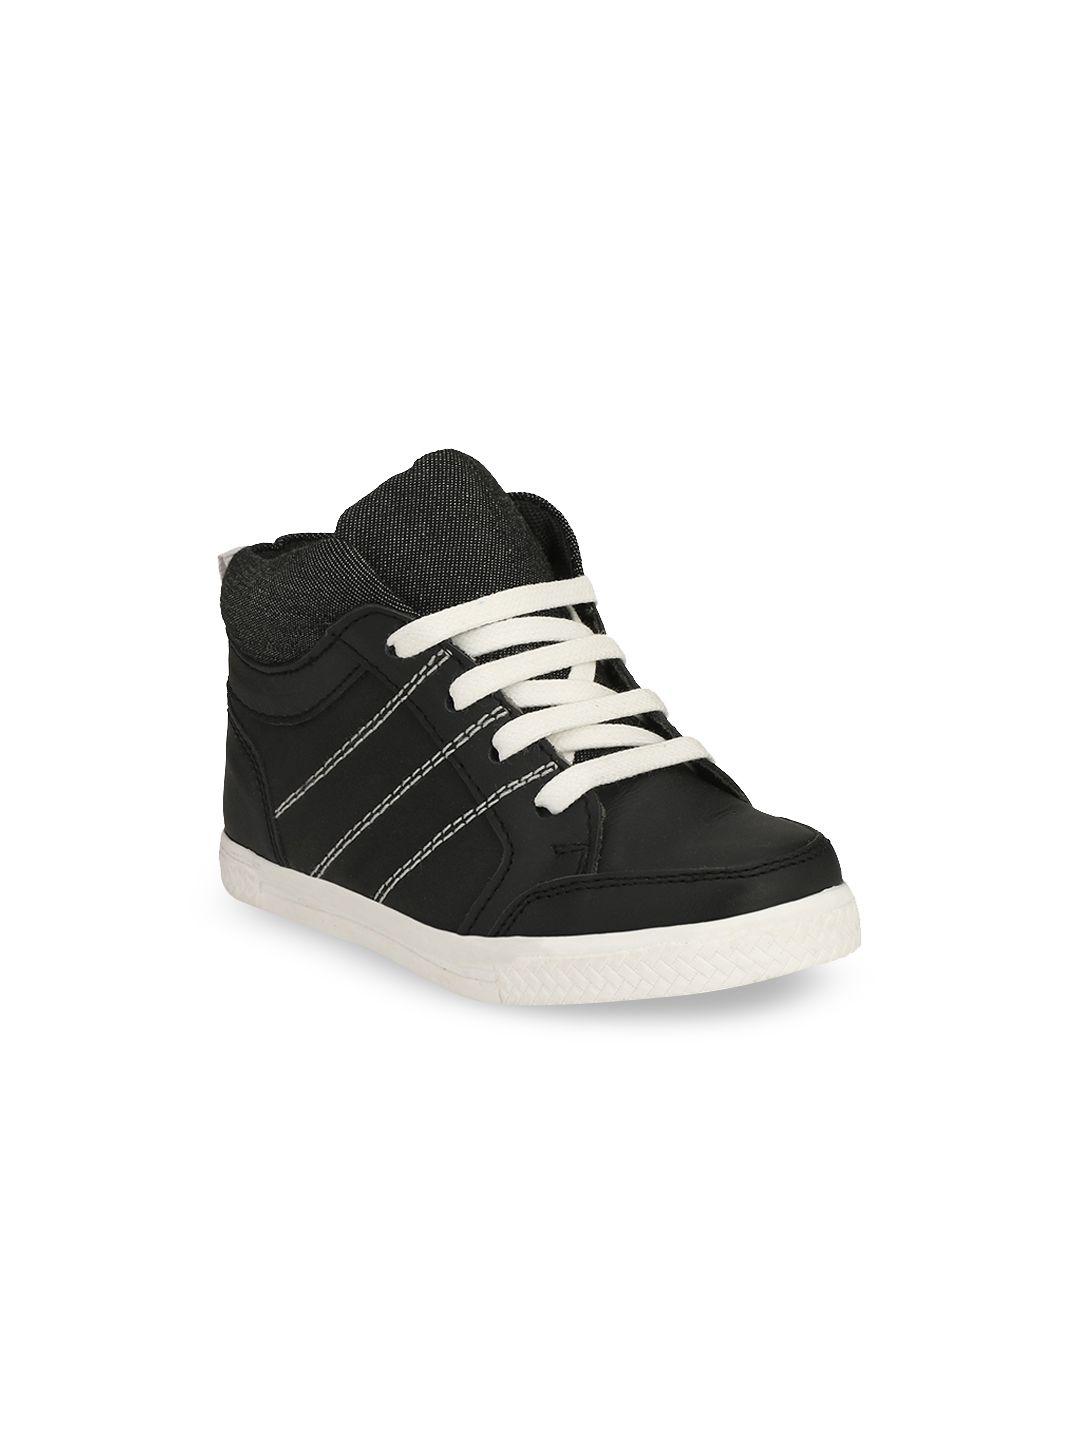 tuskey boys black solid leather high-top genuine leather breathable sneakers